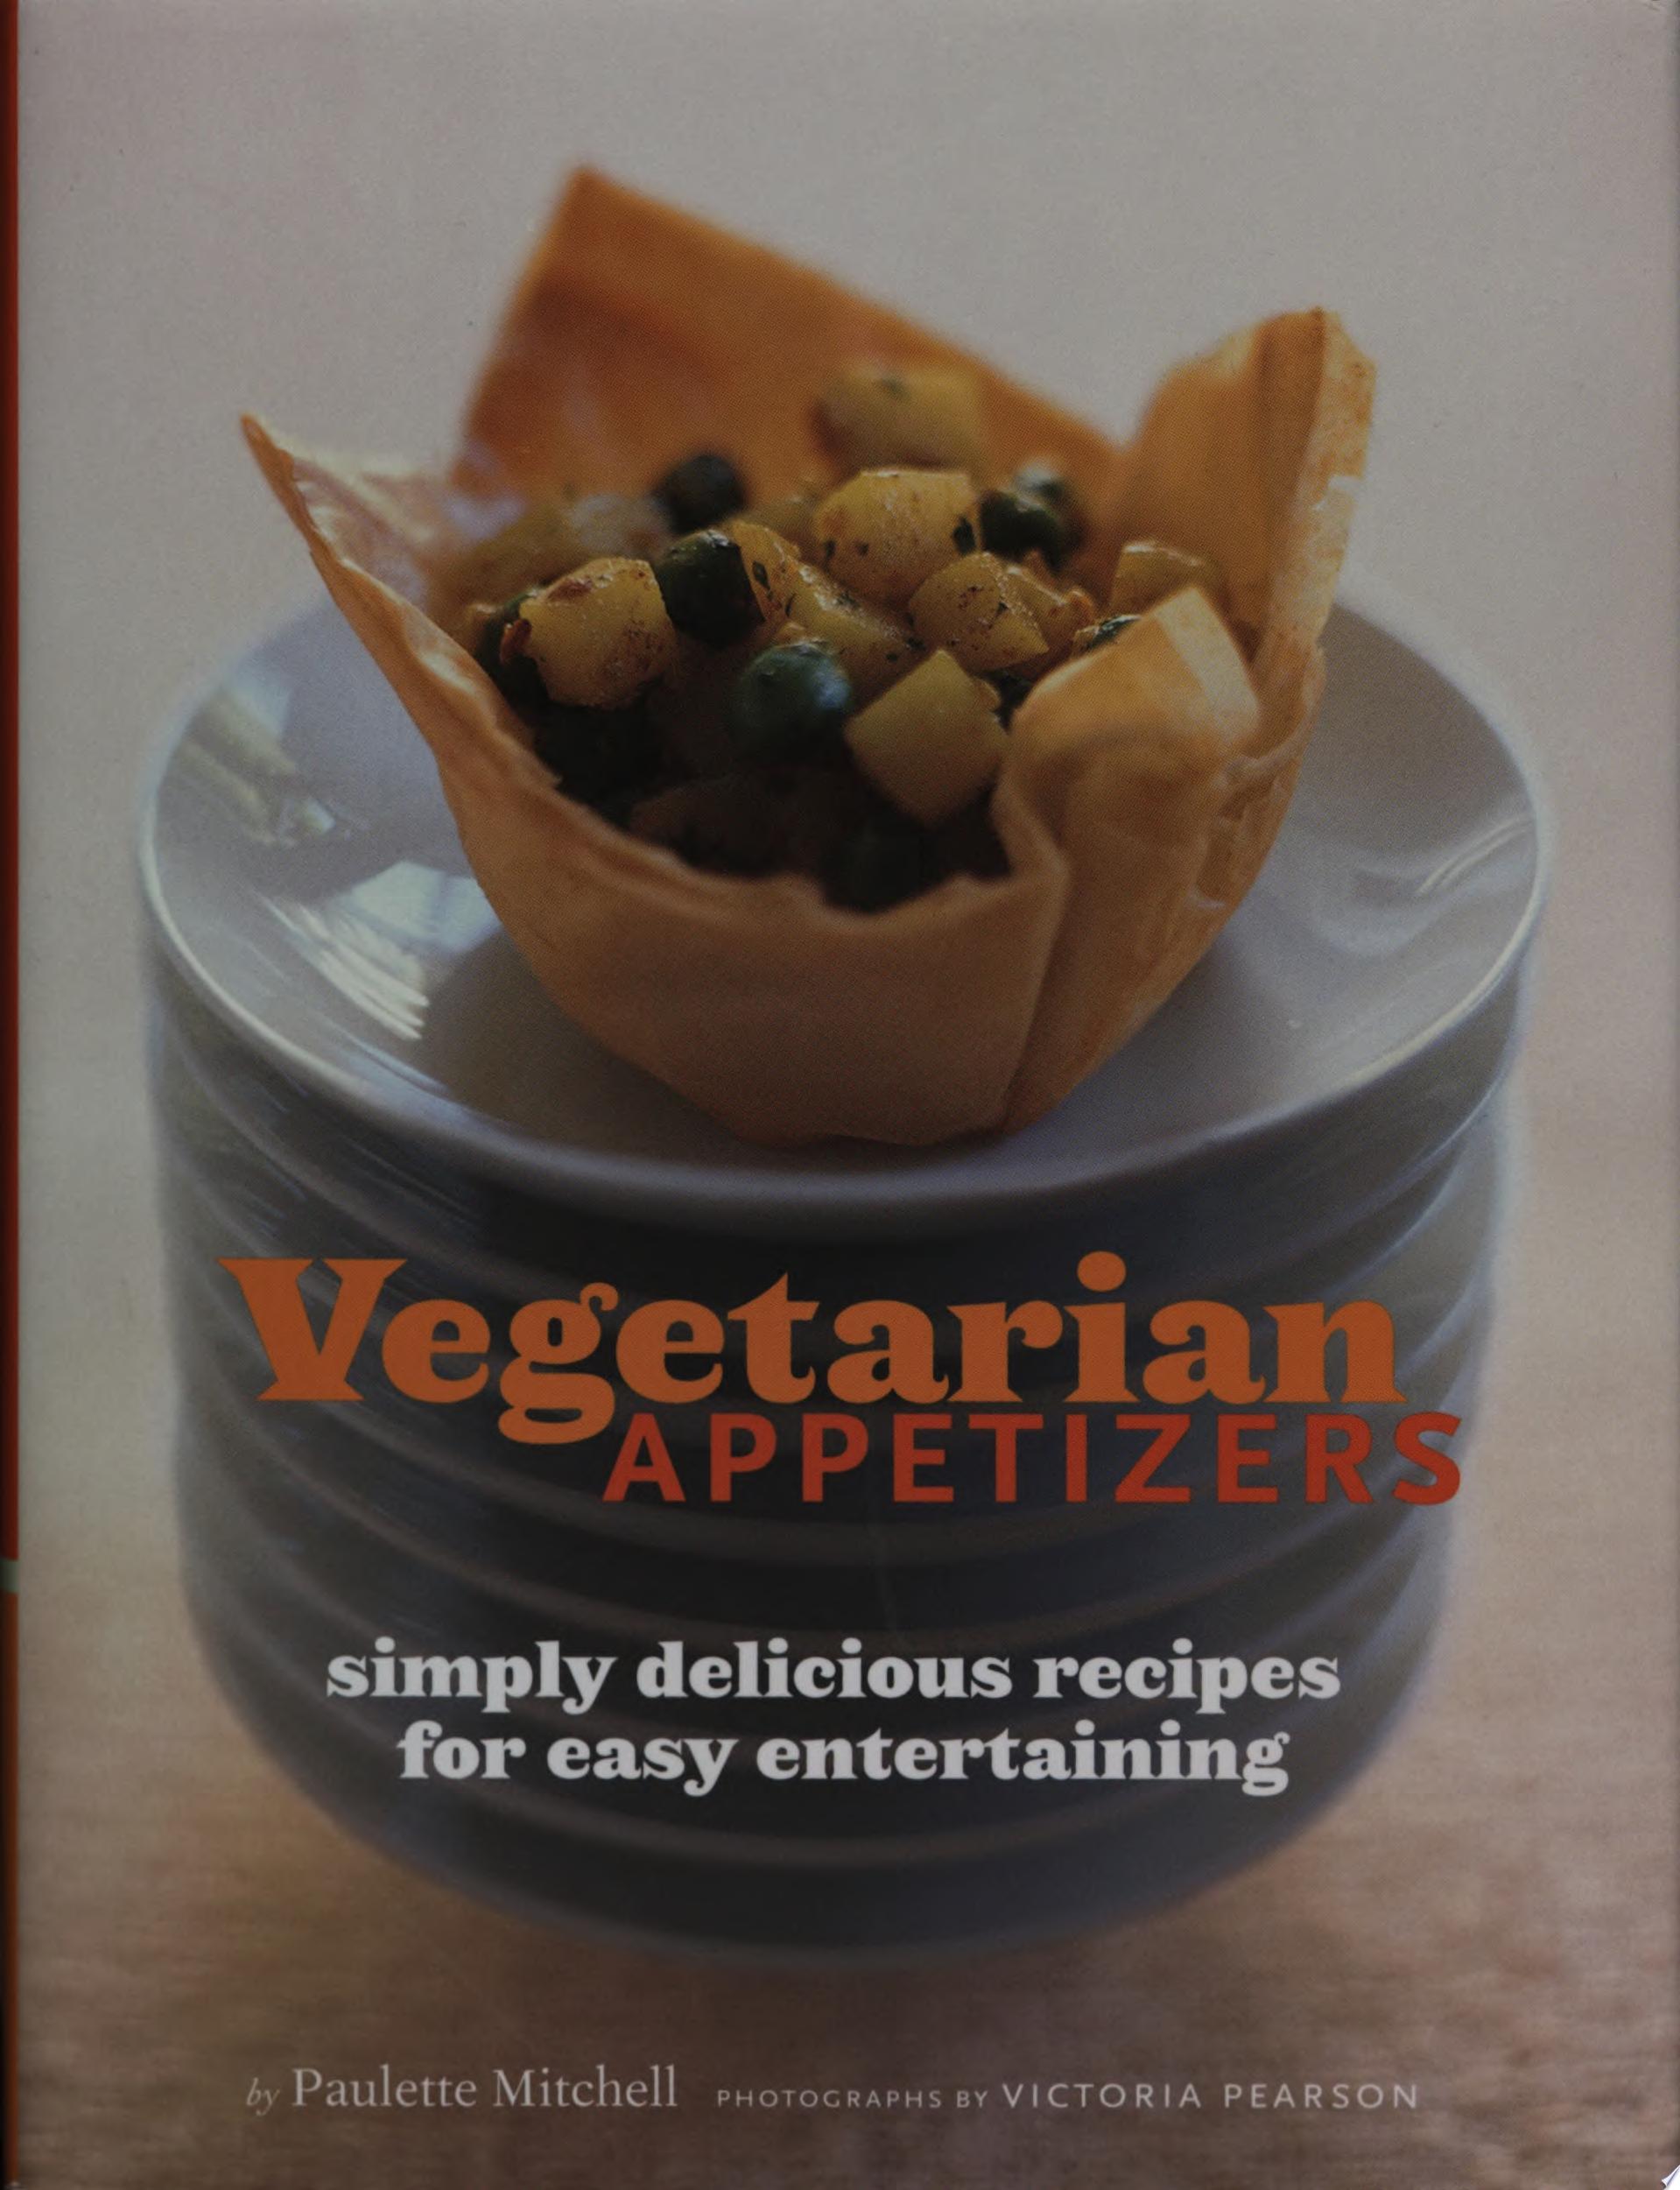 Image for "Vegetarian Appetizers"